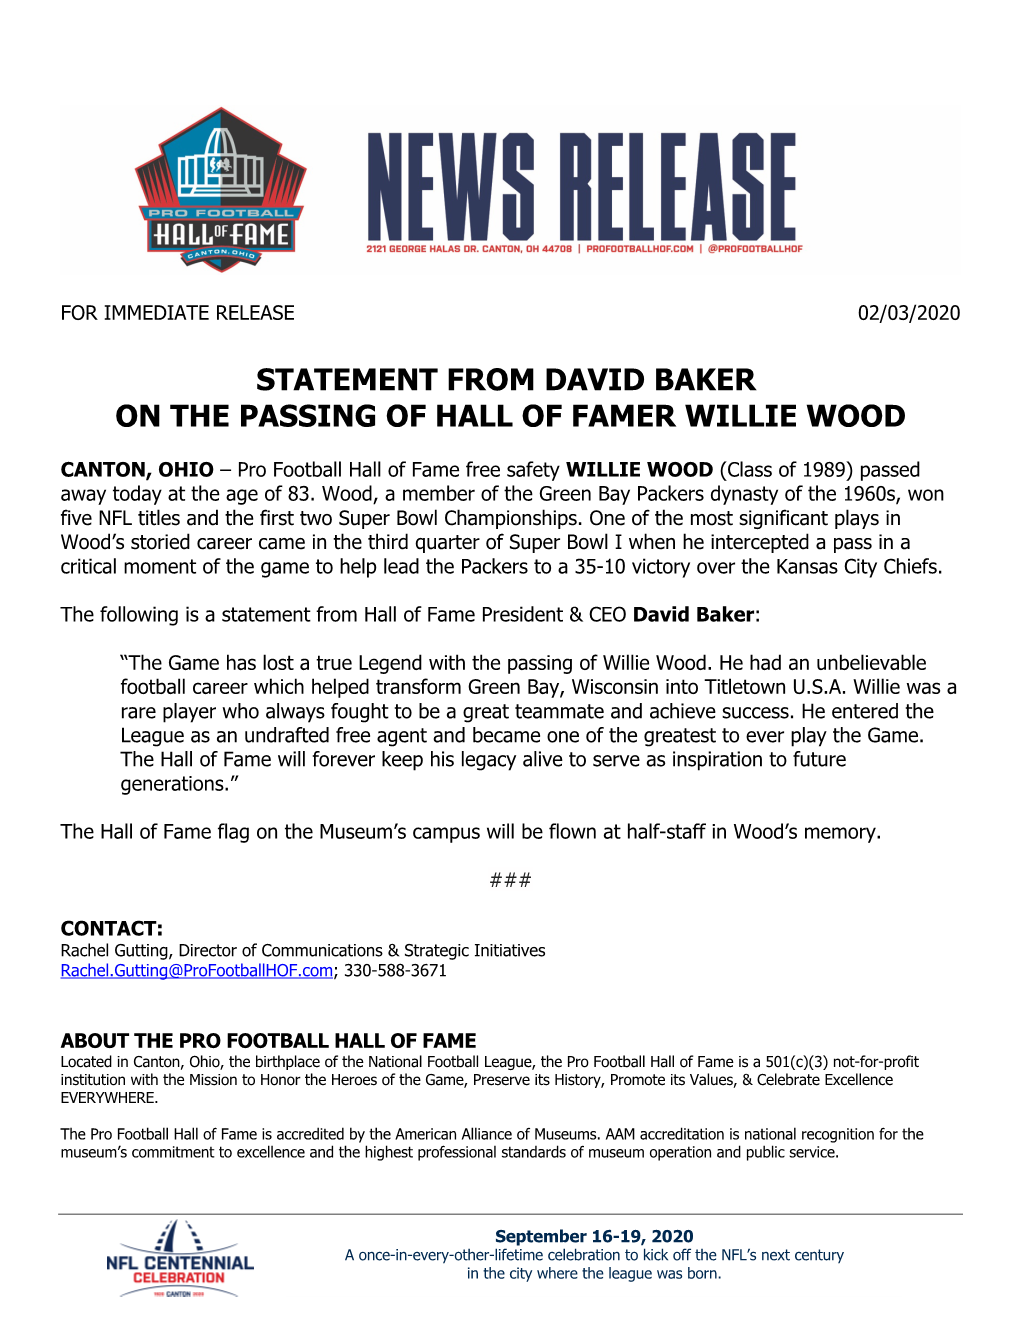 Statement from David Baker on the Passing of Hall of Famer Willie Wood